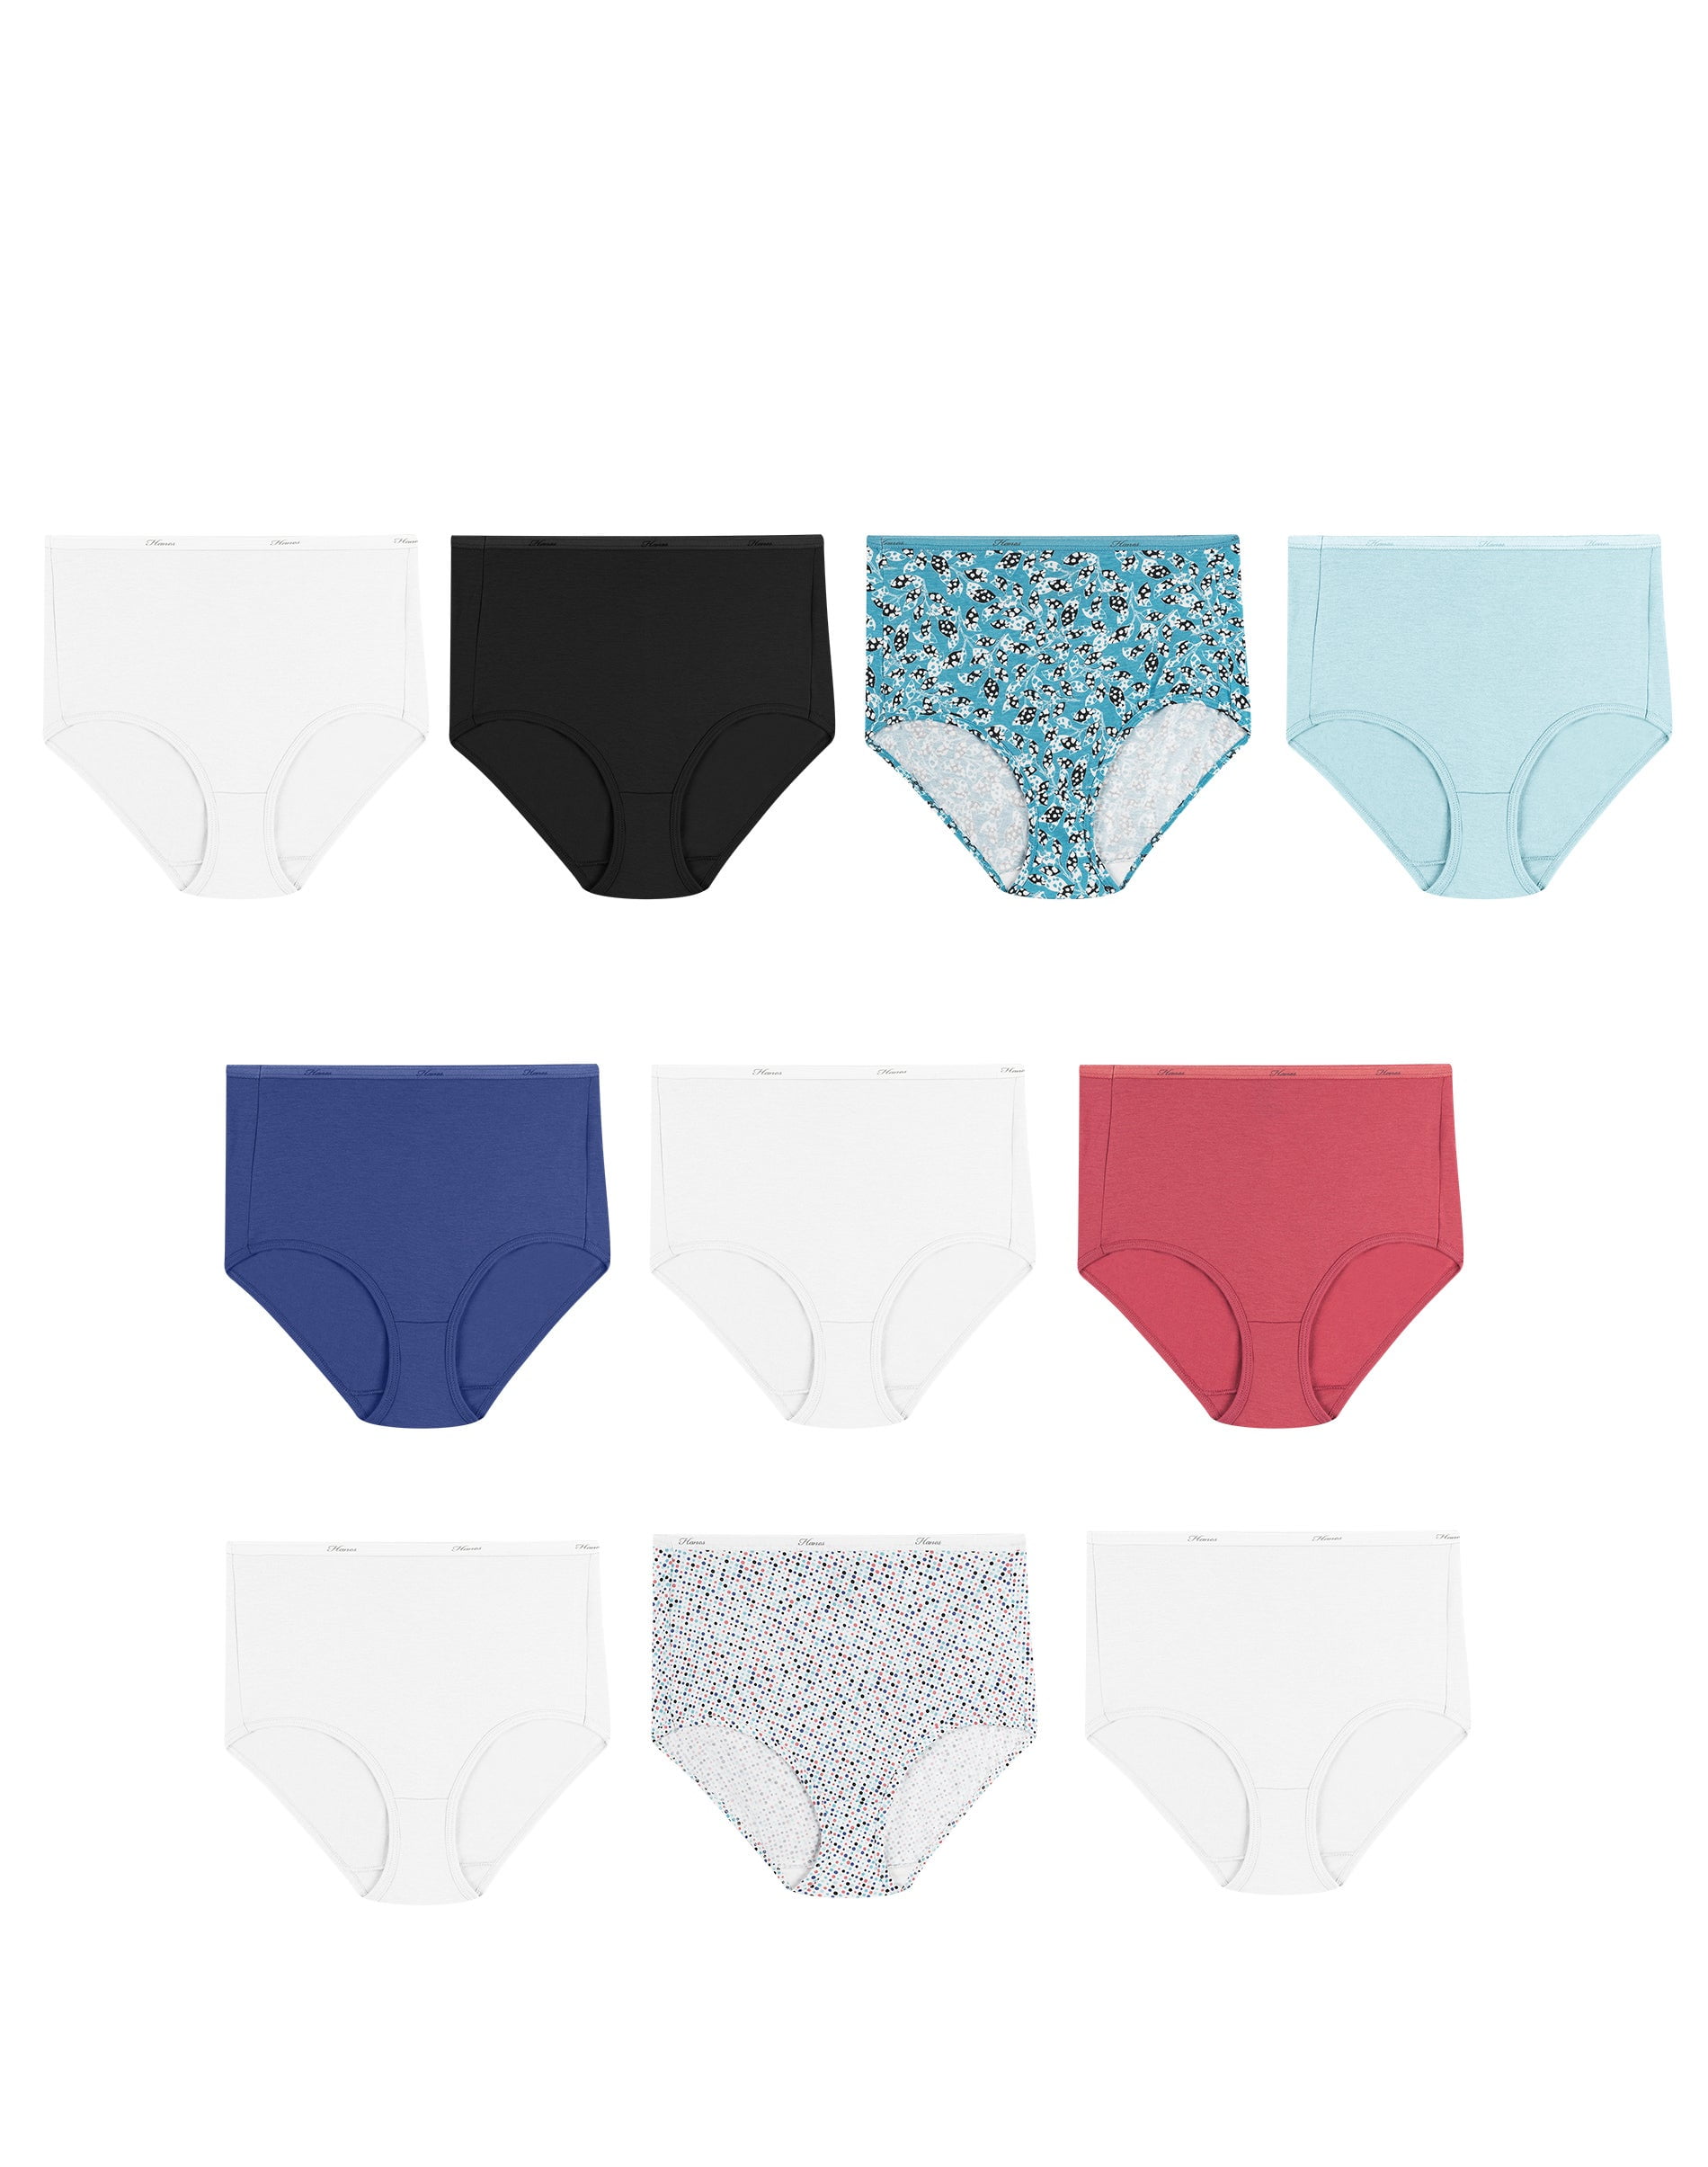 Hanes Women's Brief Panties, Assorted Color, 10 Pack, Size 8